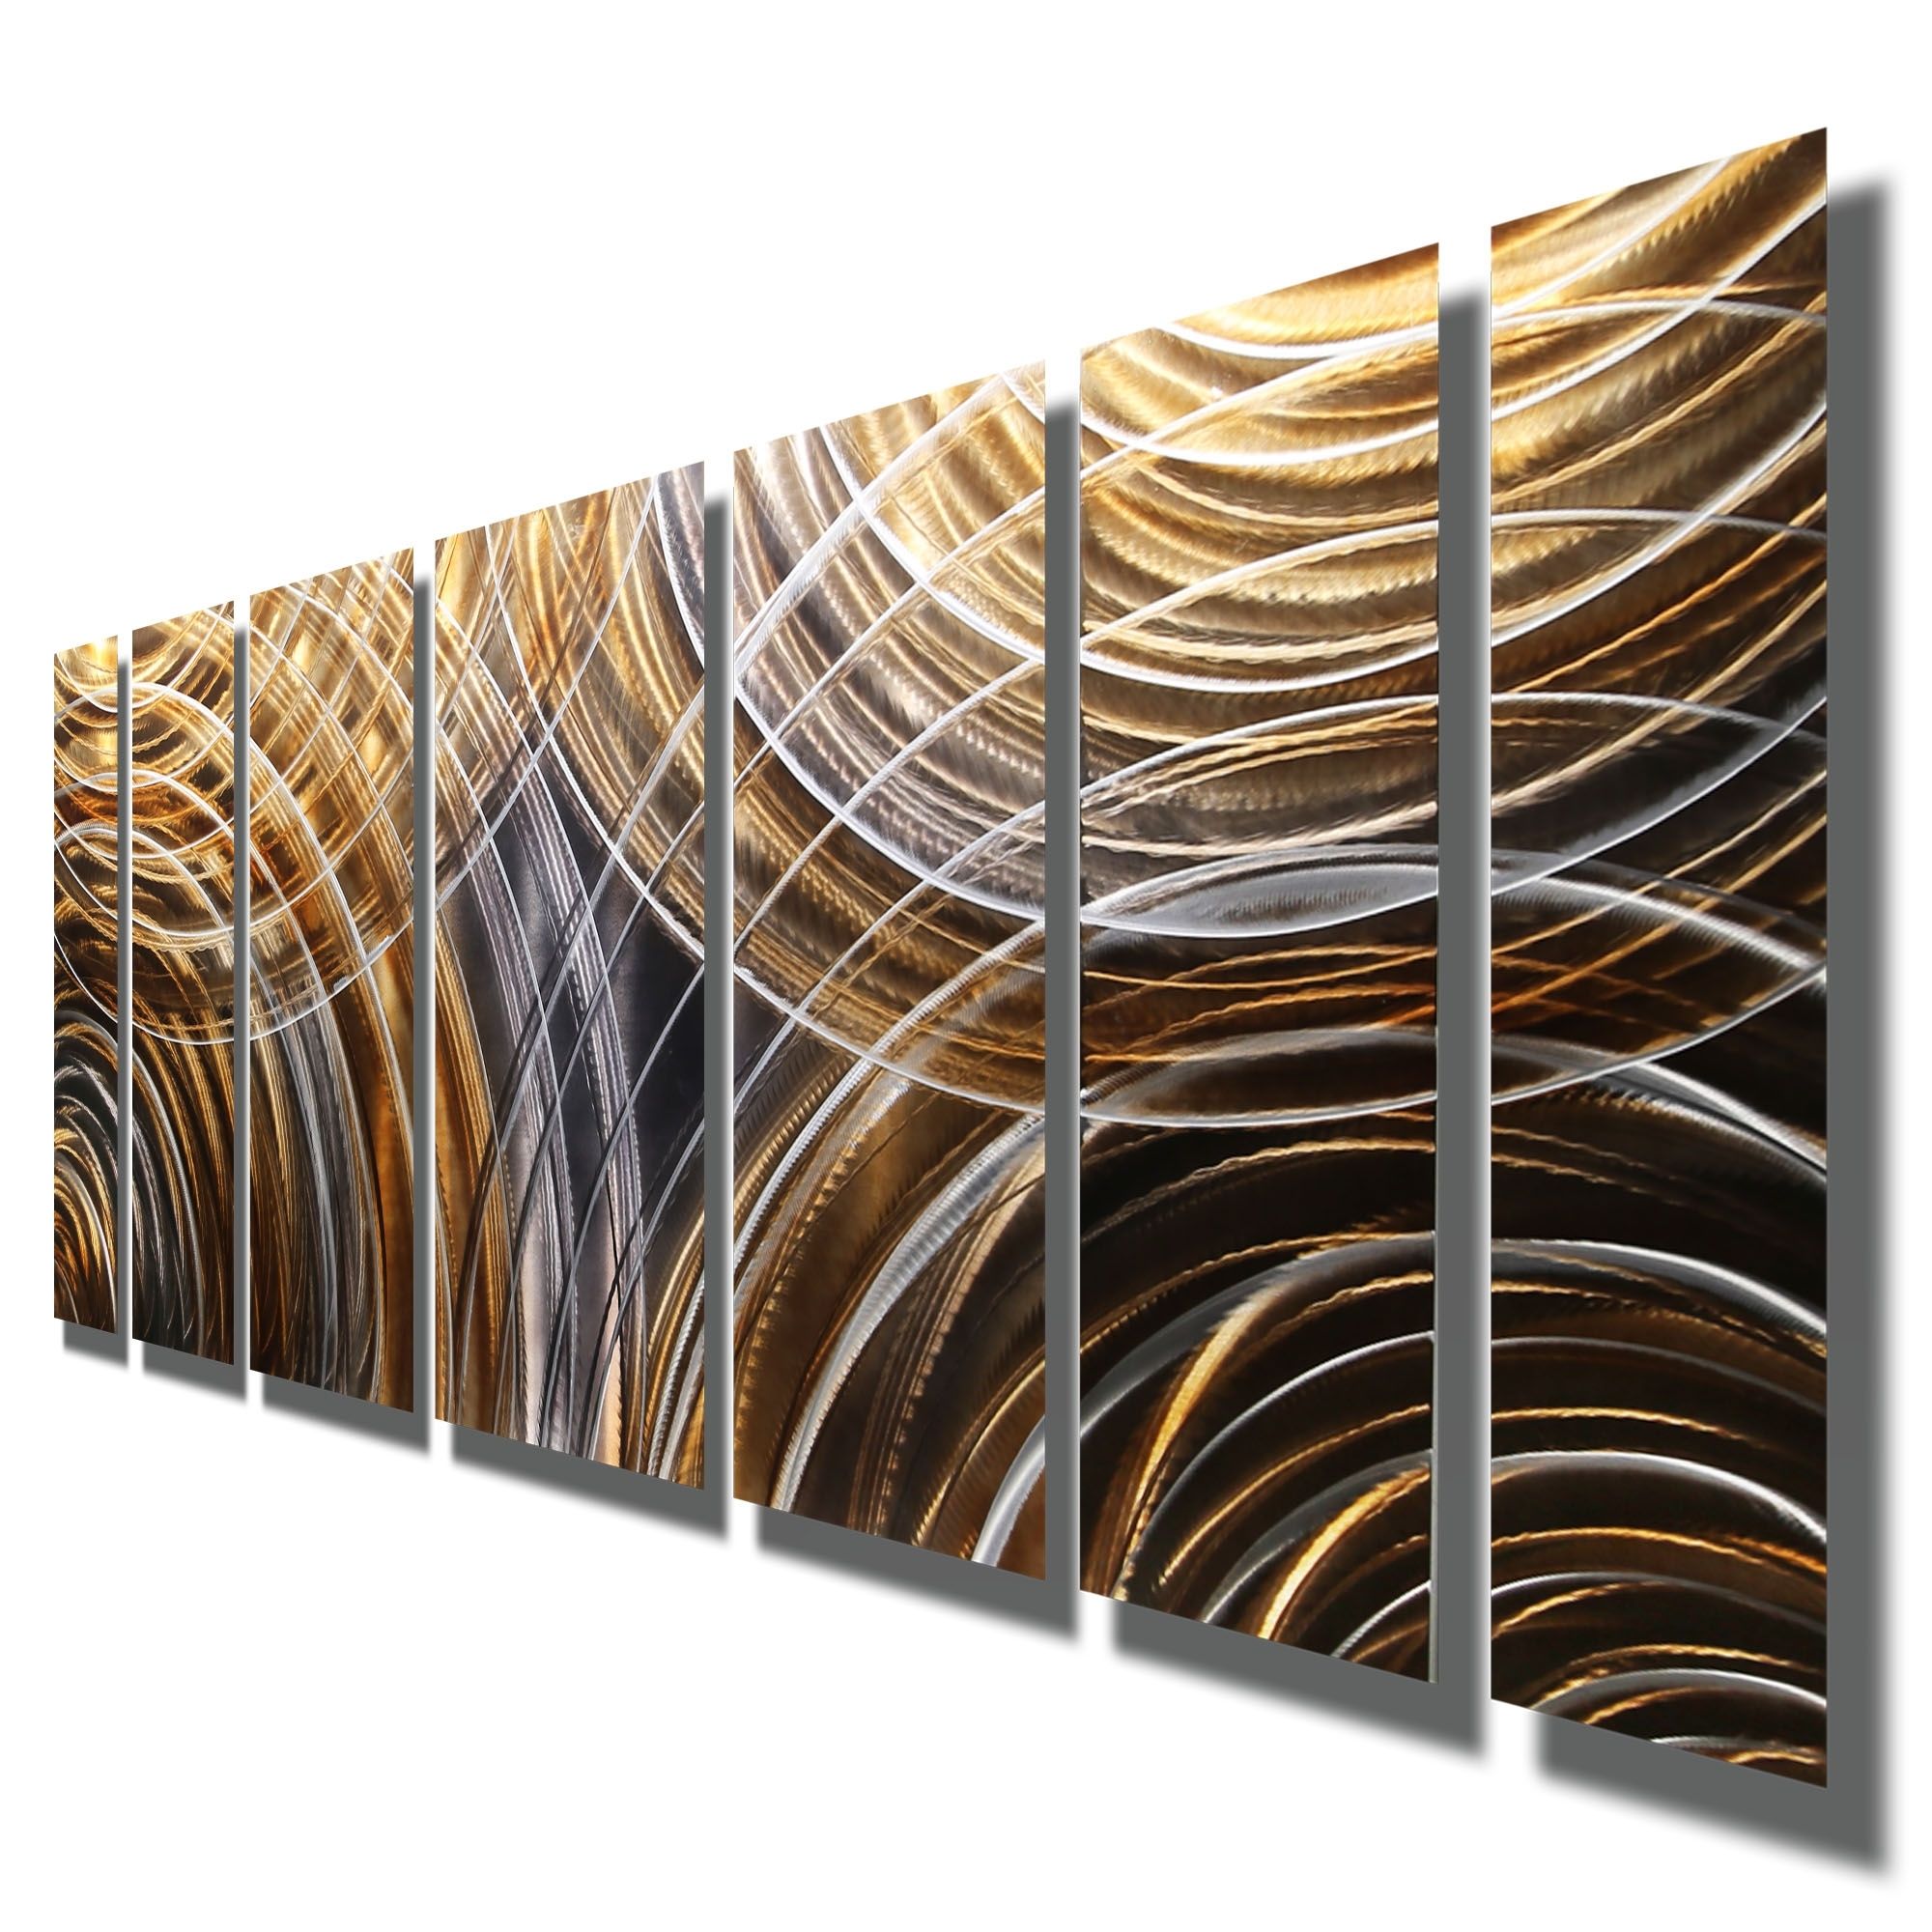 Abstract Metal Wall Art Intended For Famous Emboldenedjon Allen – Earthtone Abstract Metal Wall Art (View 11 of 15)